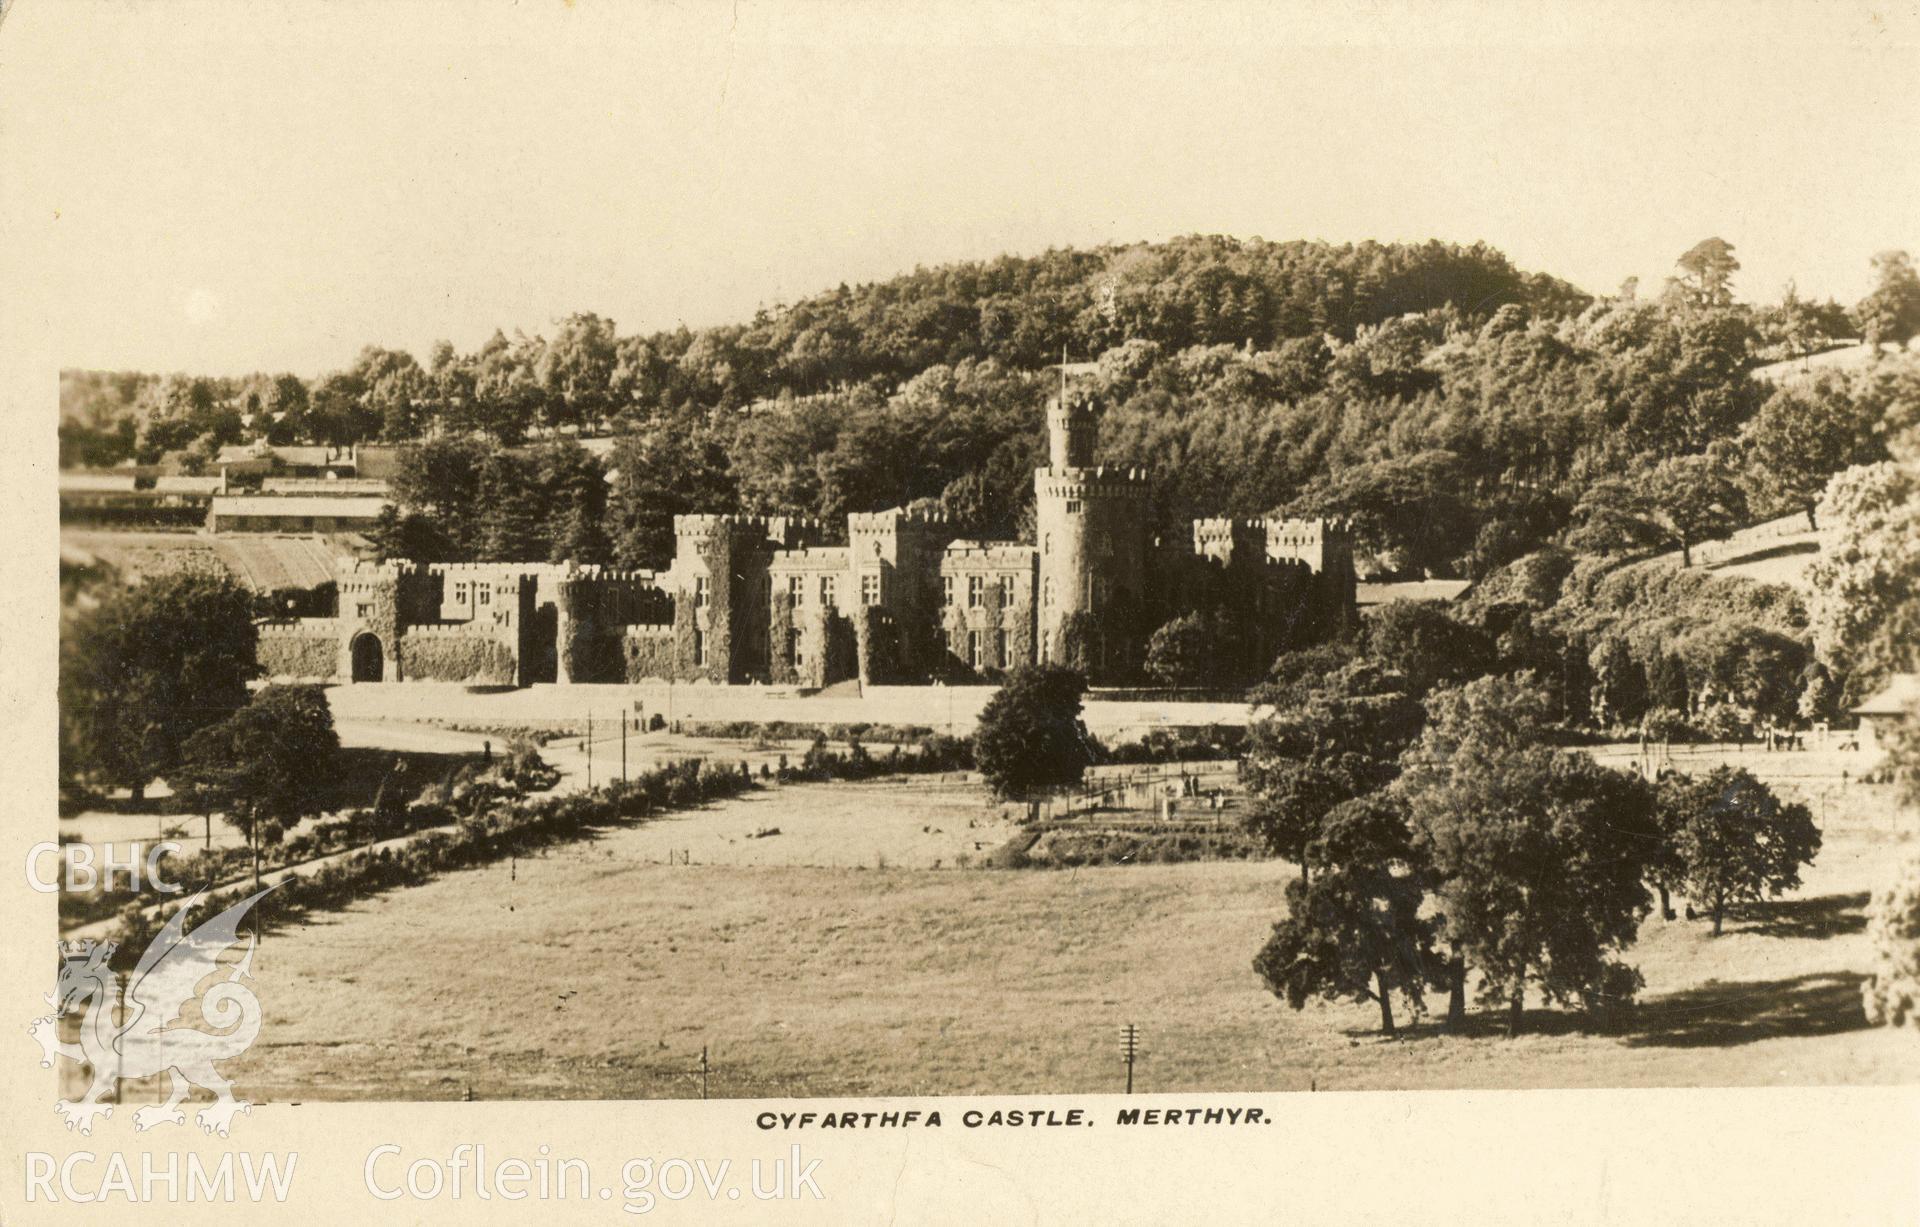 Digitised postcard image of Cyfarthfa Castle, Merthyr Tydfil. Produced by Parks and Gardens Data Services, from an original item in the Peter Davis Collection at Parks and Gardens UK. We hold only web-resolution images of this collection, suitable for viewing on screen and for research purposes only. We do not hold the original images, or publication quality scans.